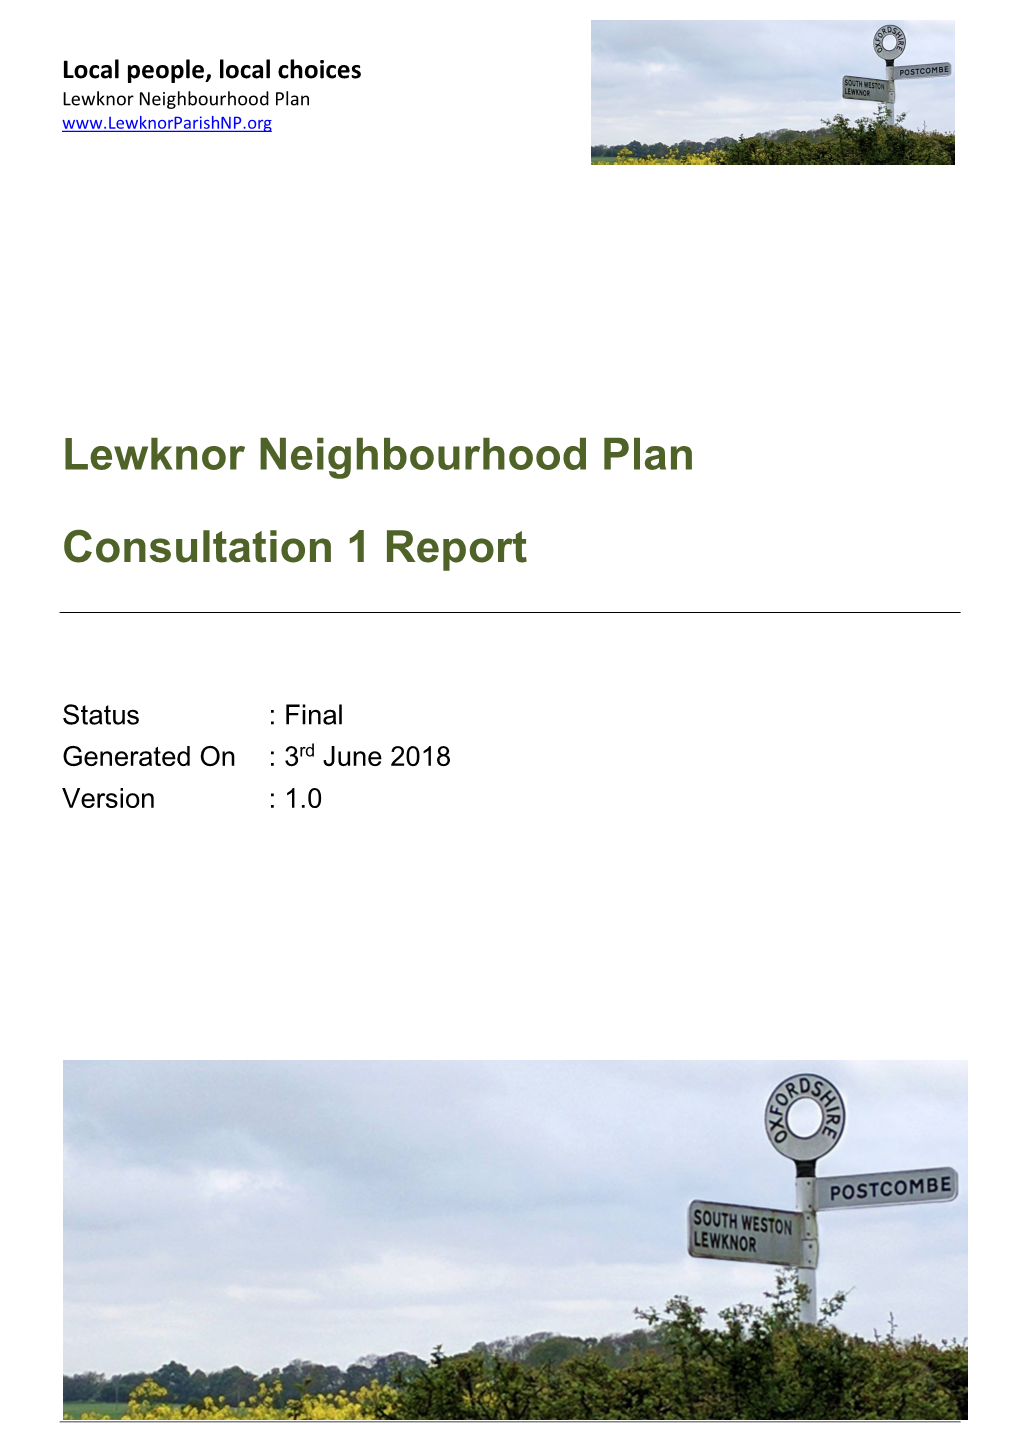 LSWP NP Consultation 1 Report Final V1.0